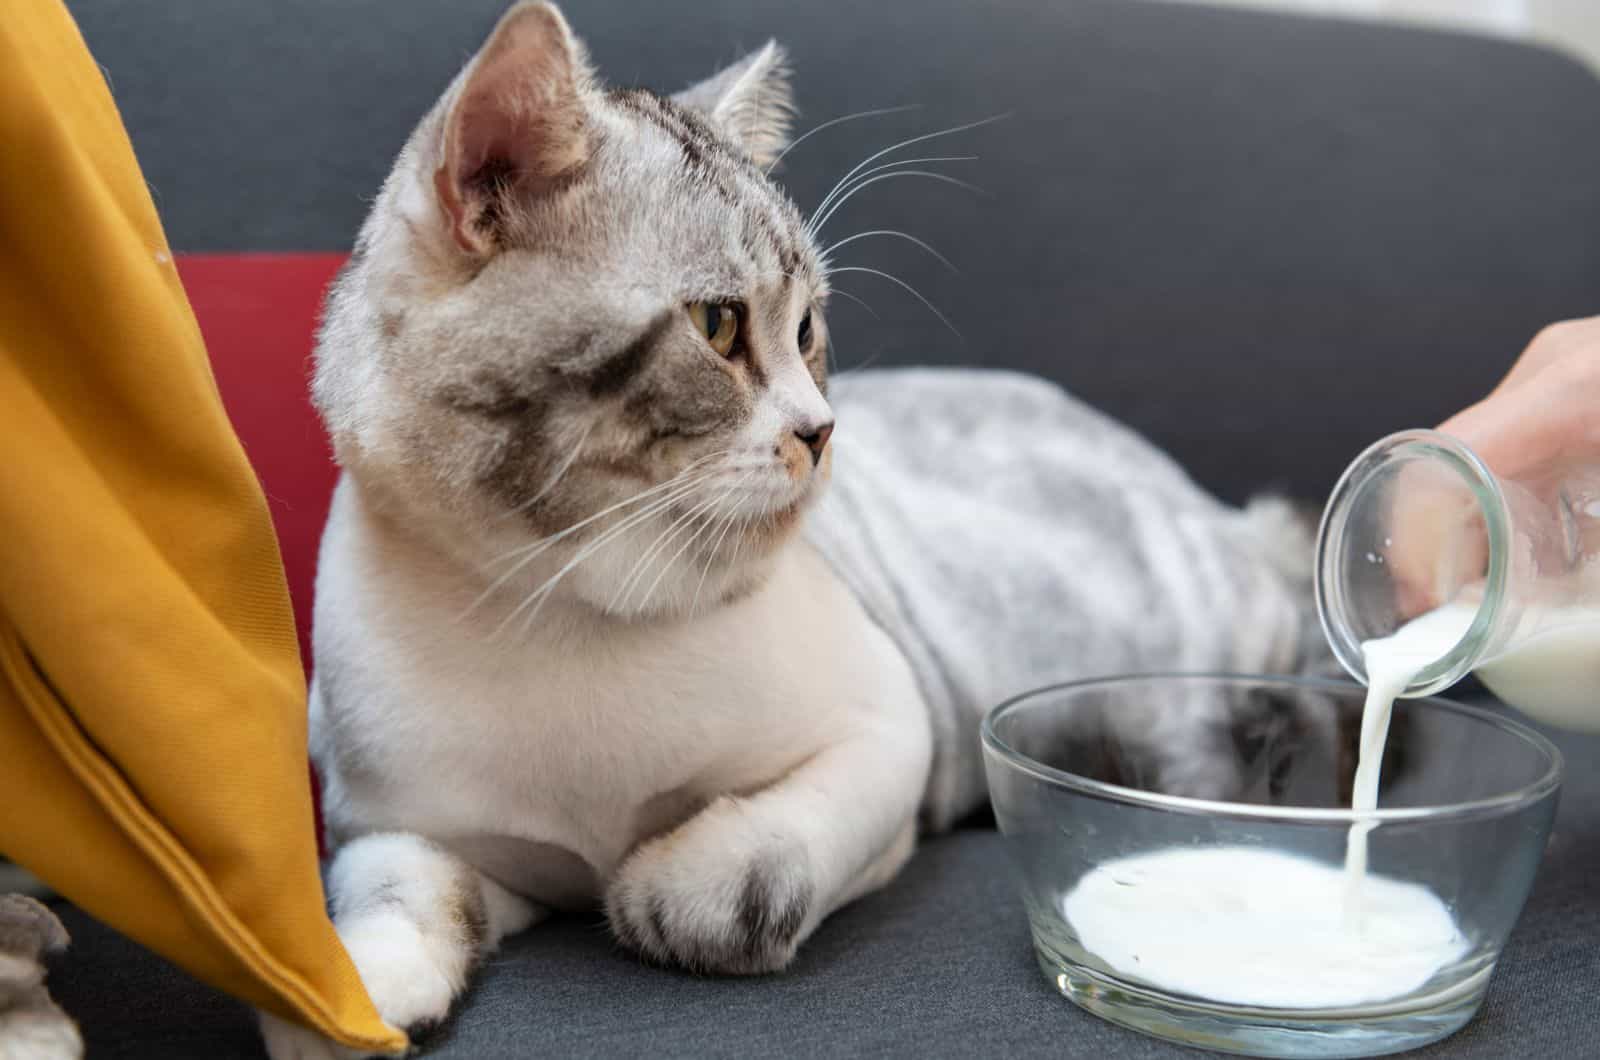 Human pouring milk into glass bowl next to cat